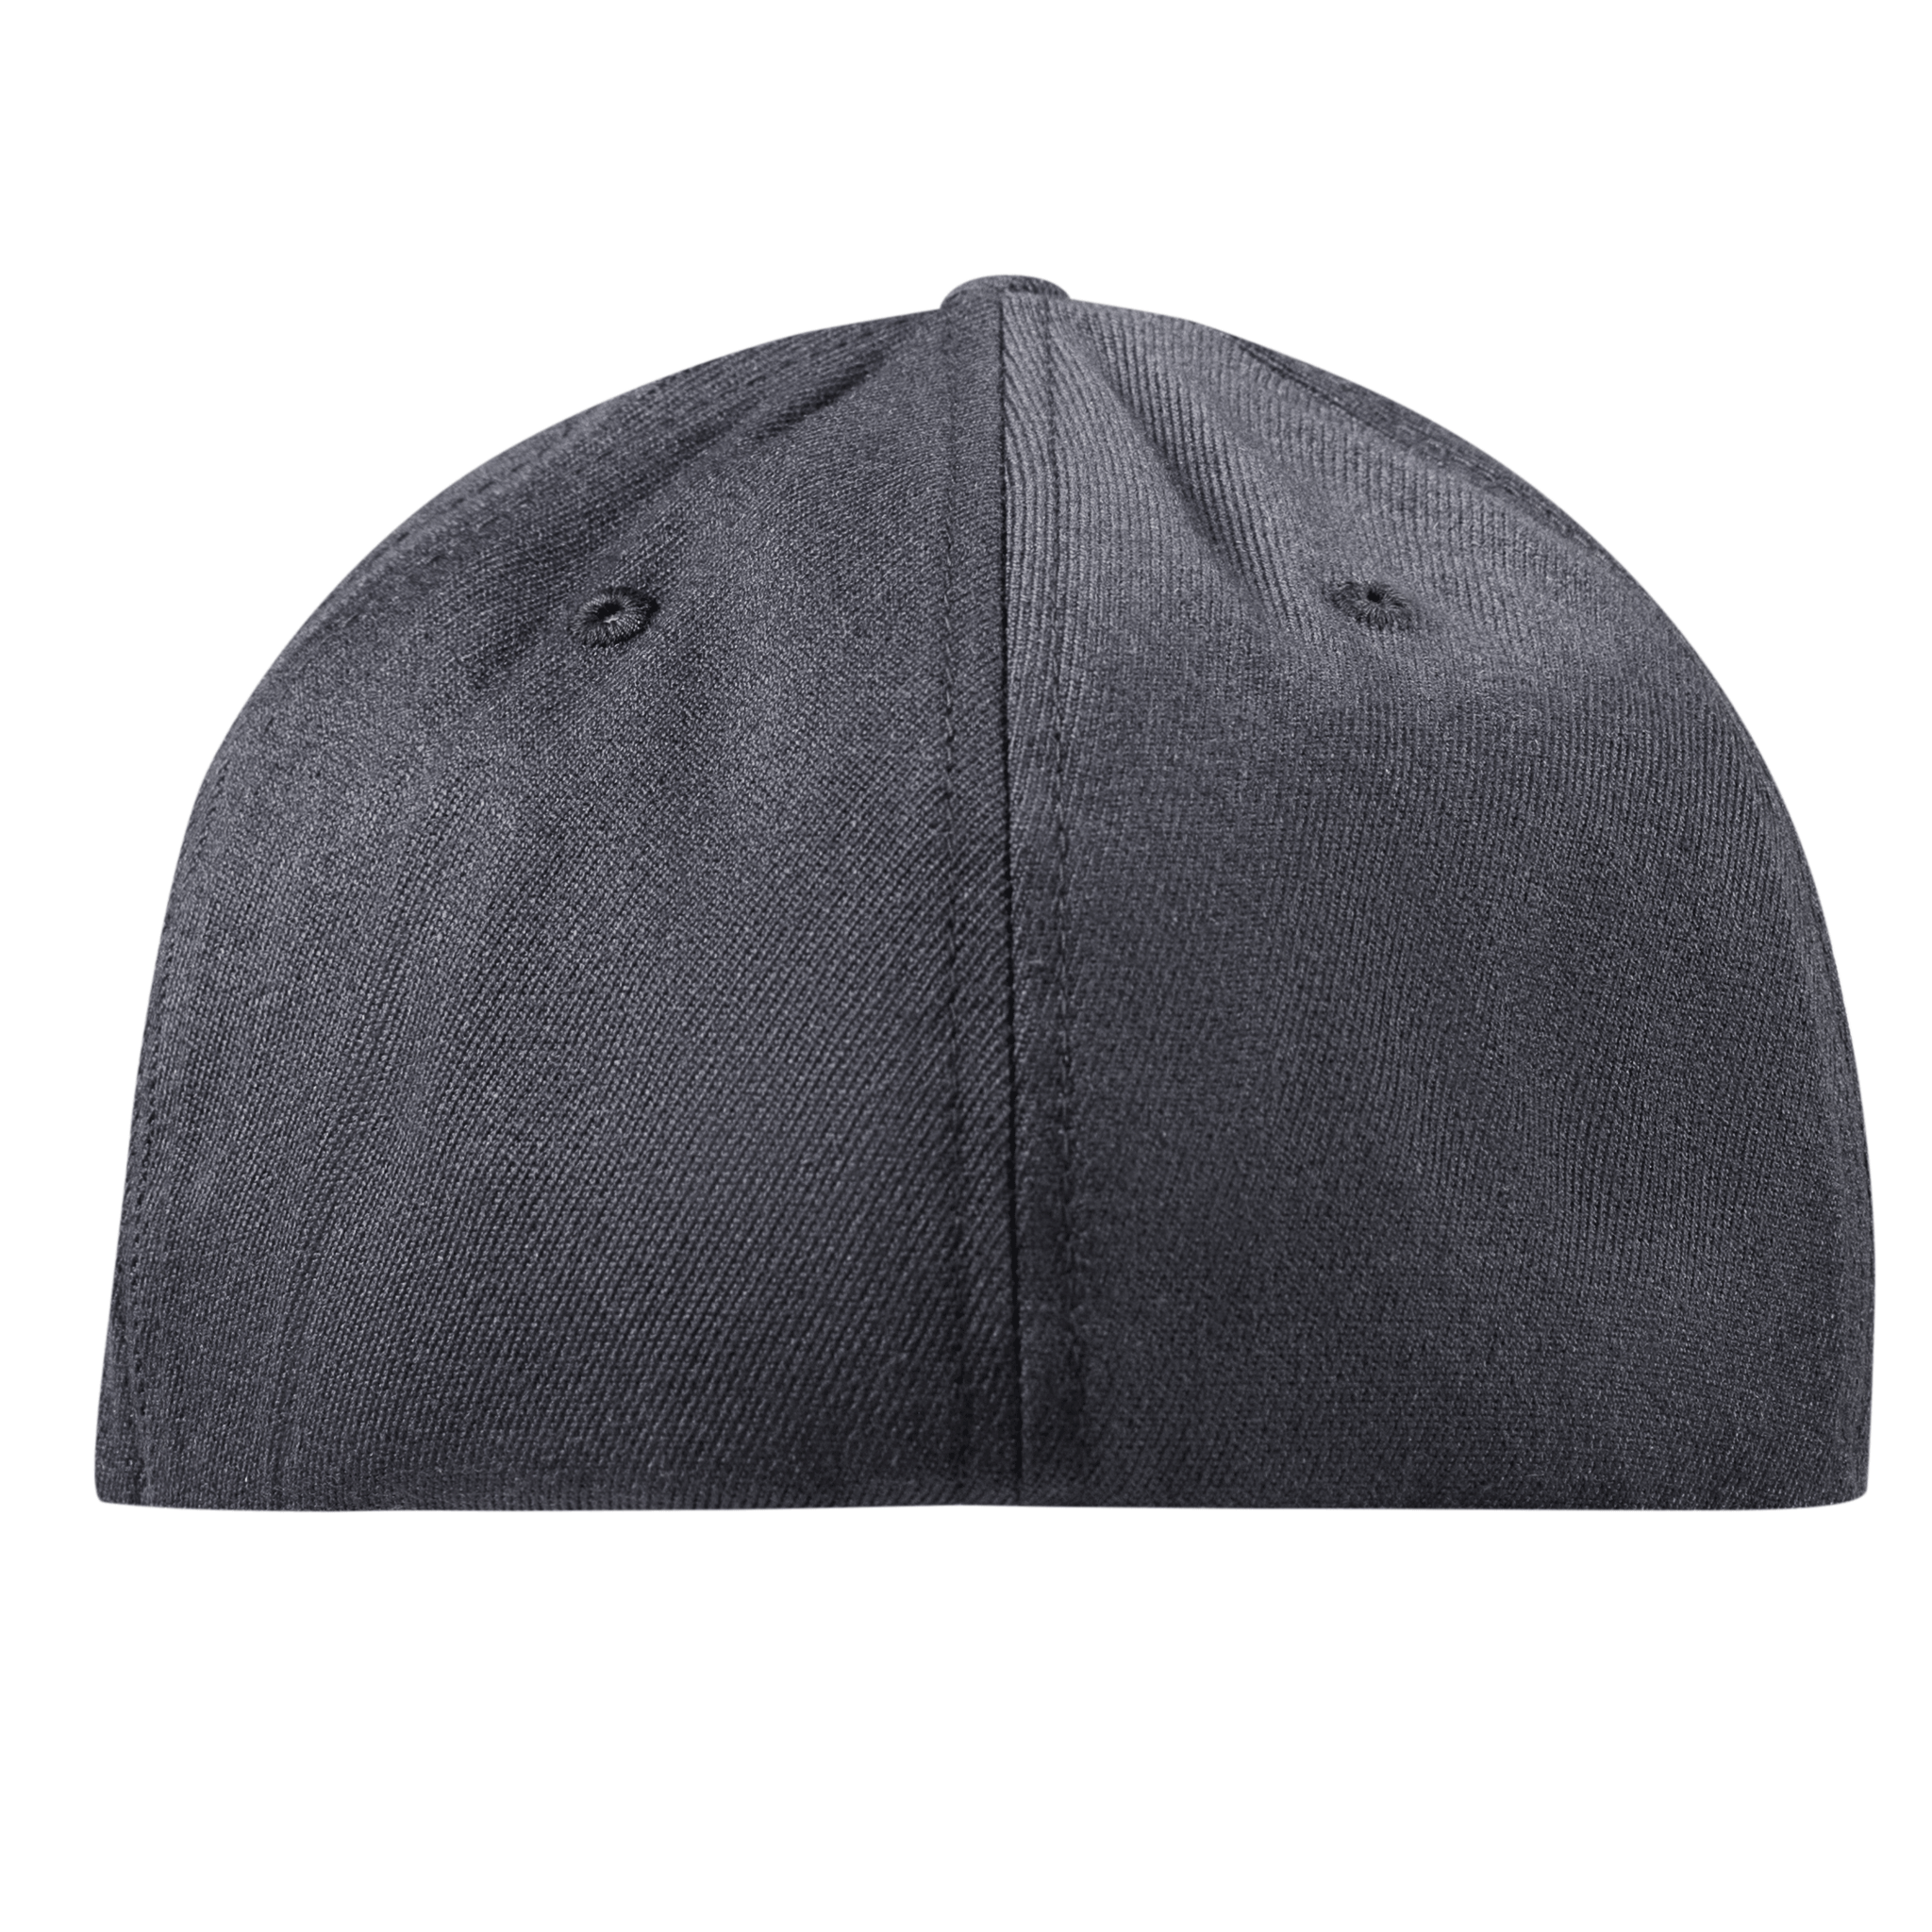 Old Glory Midnight Flexfit Fitted Back Charcoal